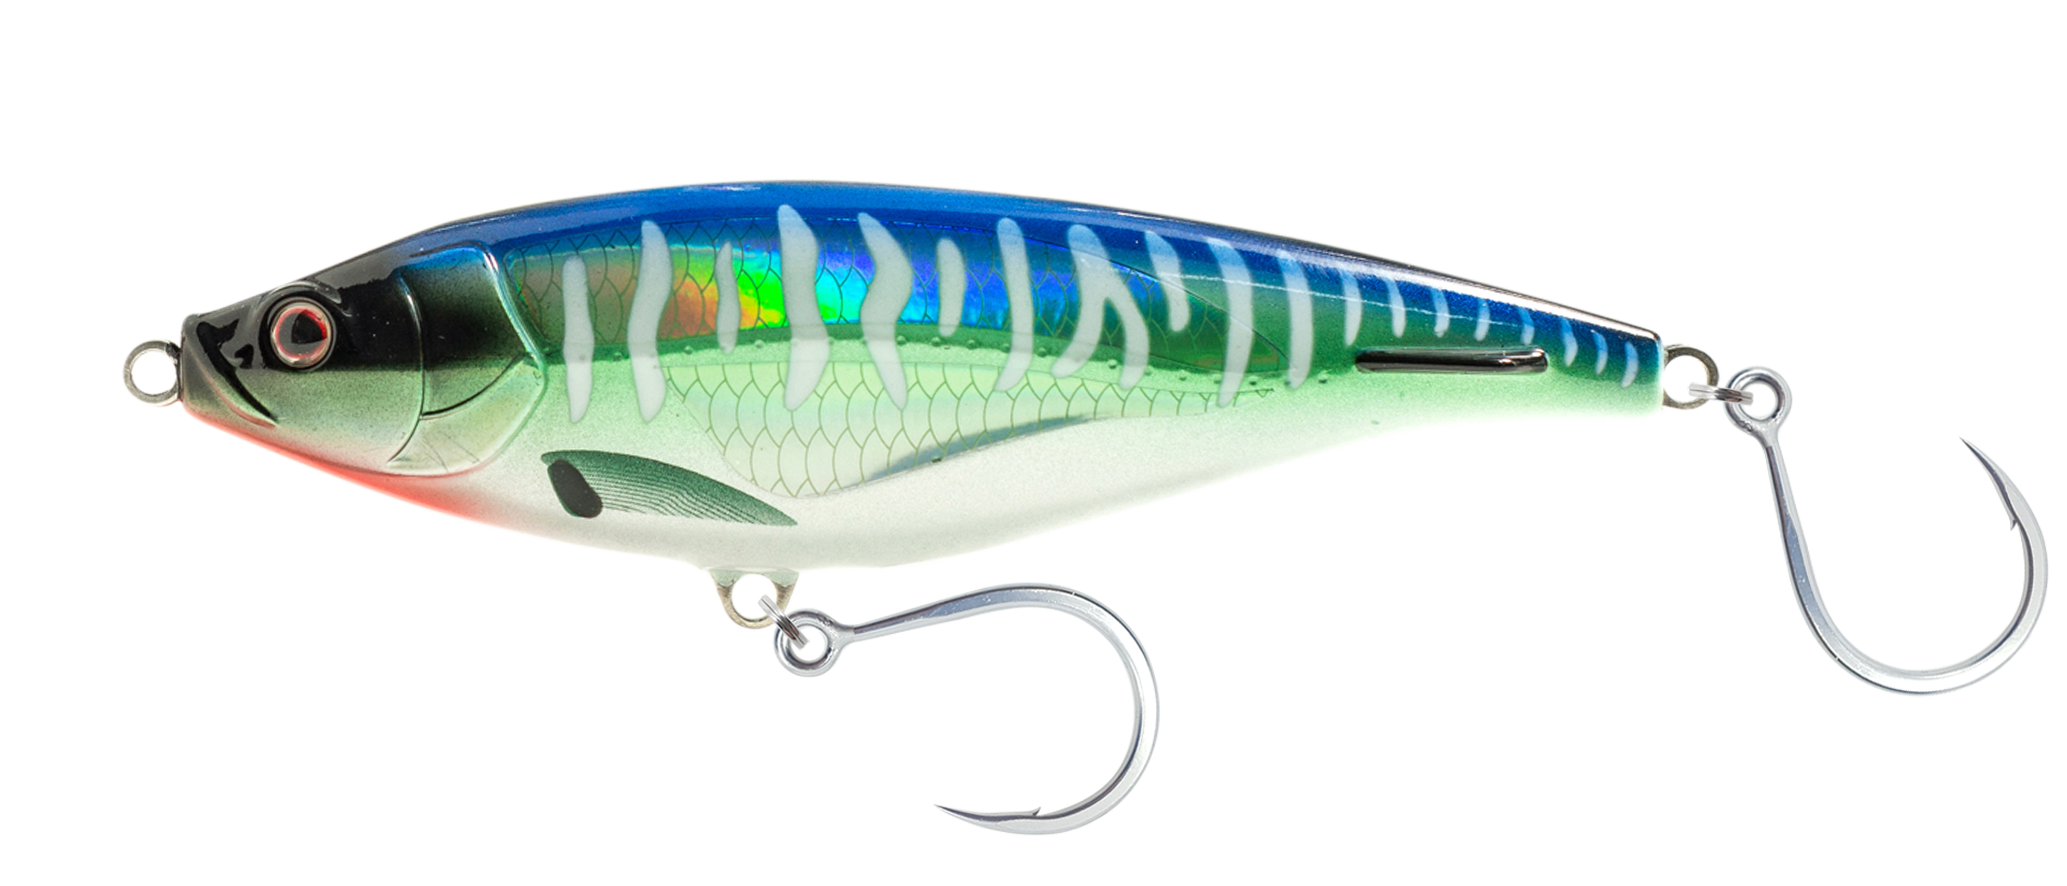 How to use the Amazing Madscad Twitchbait/Stickbait Lure from Australia 